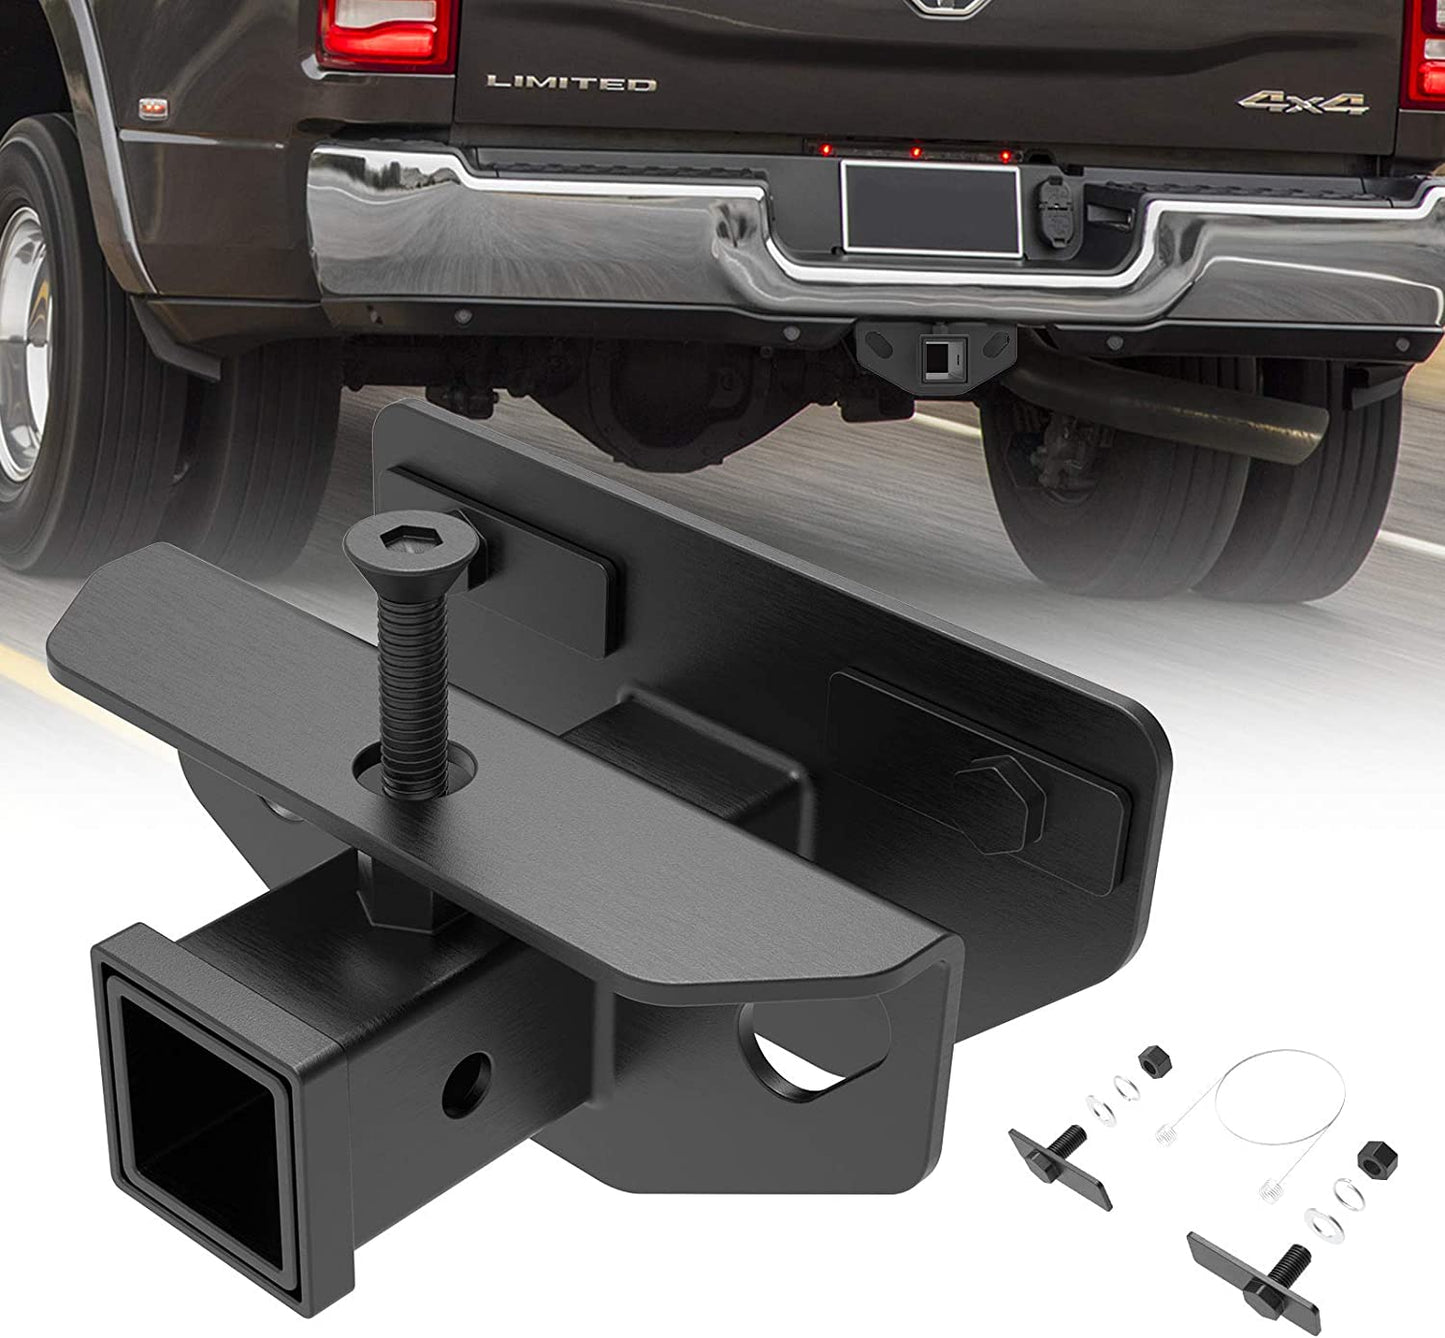 Rear Trailer Hitch Receiver Fit for Dodge Ram 2003-2021